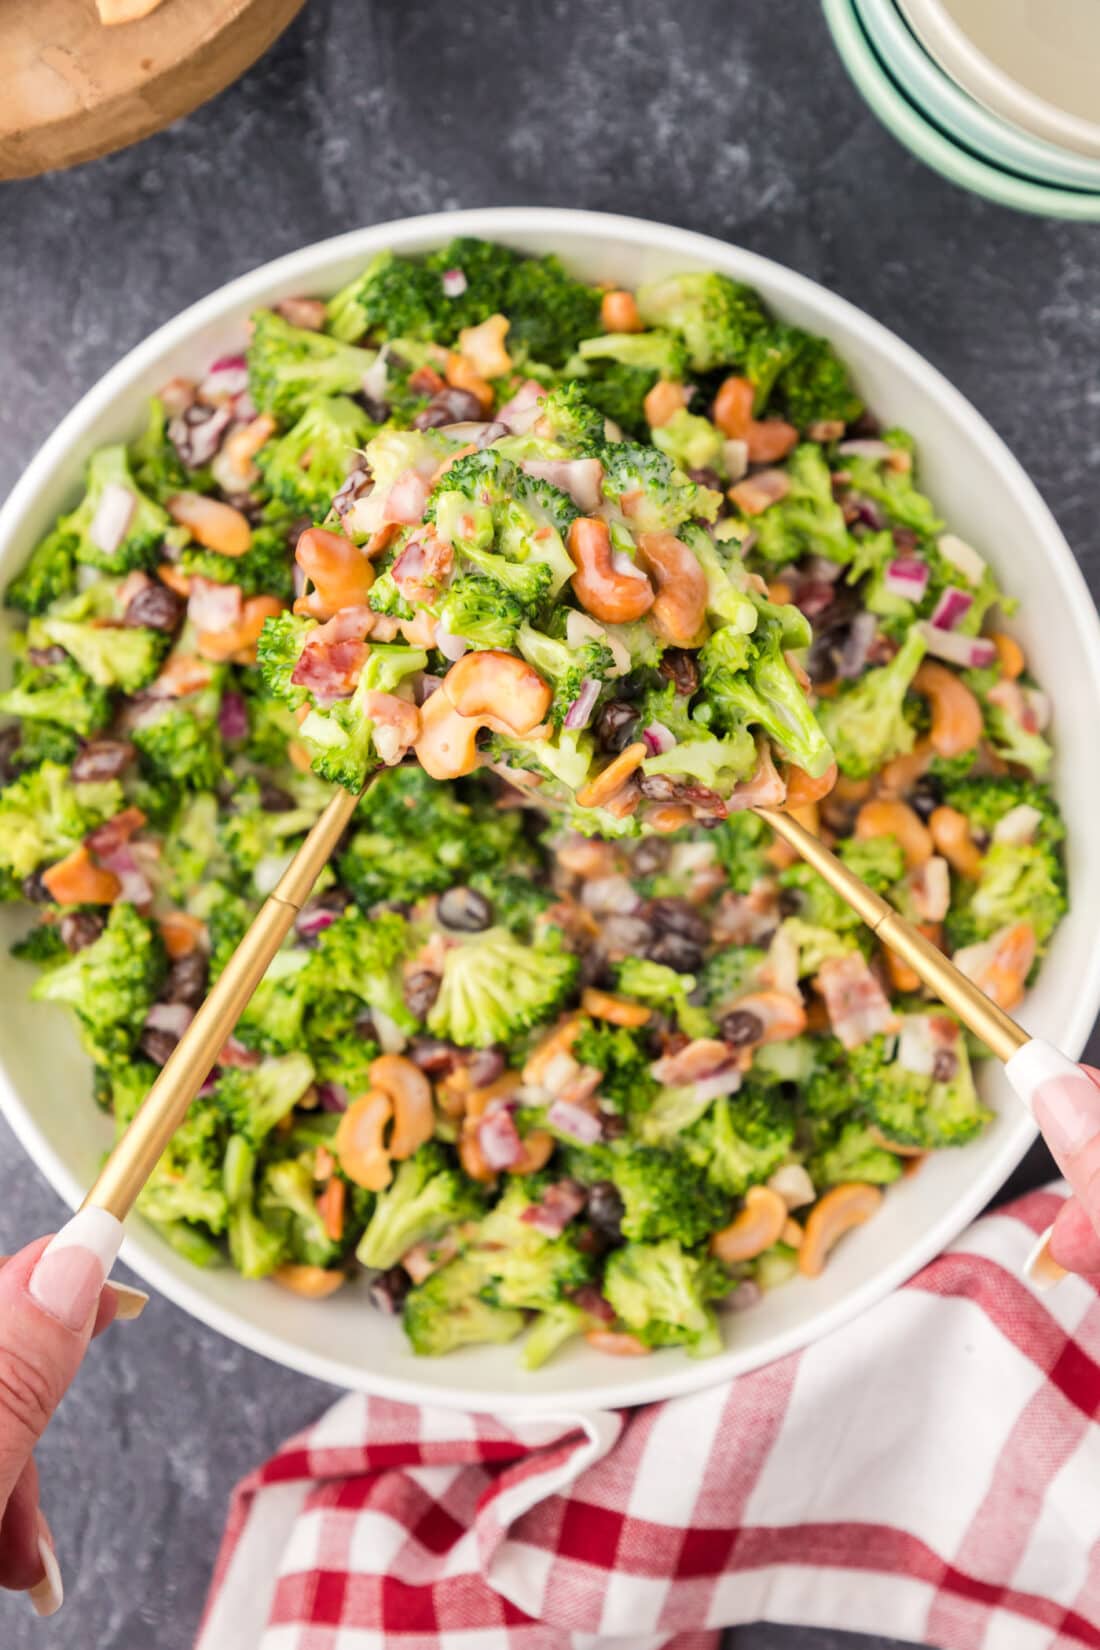 Two spoons holding up Broccoli Cashew Salad from a bowl